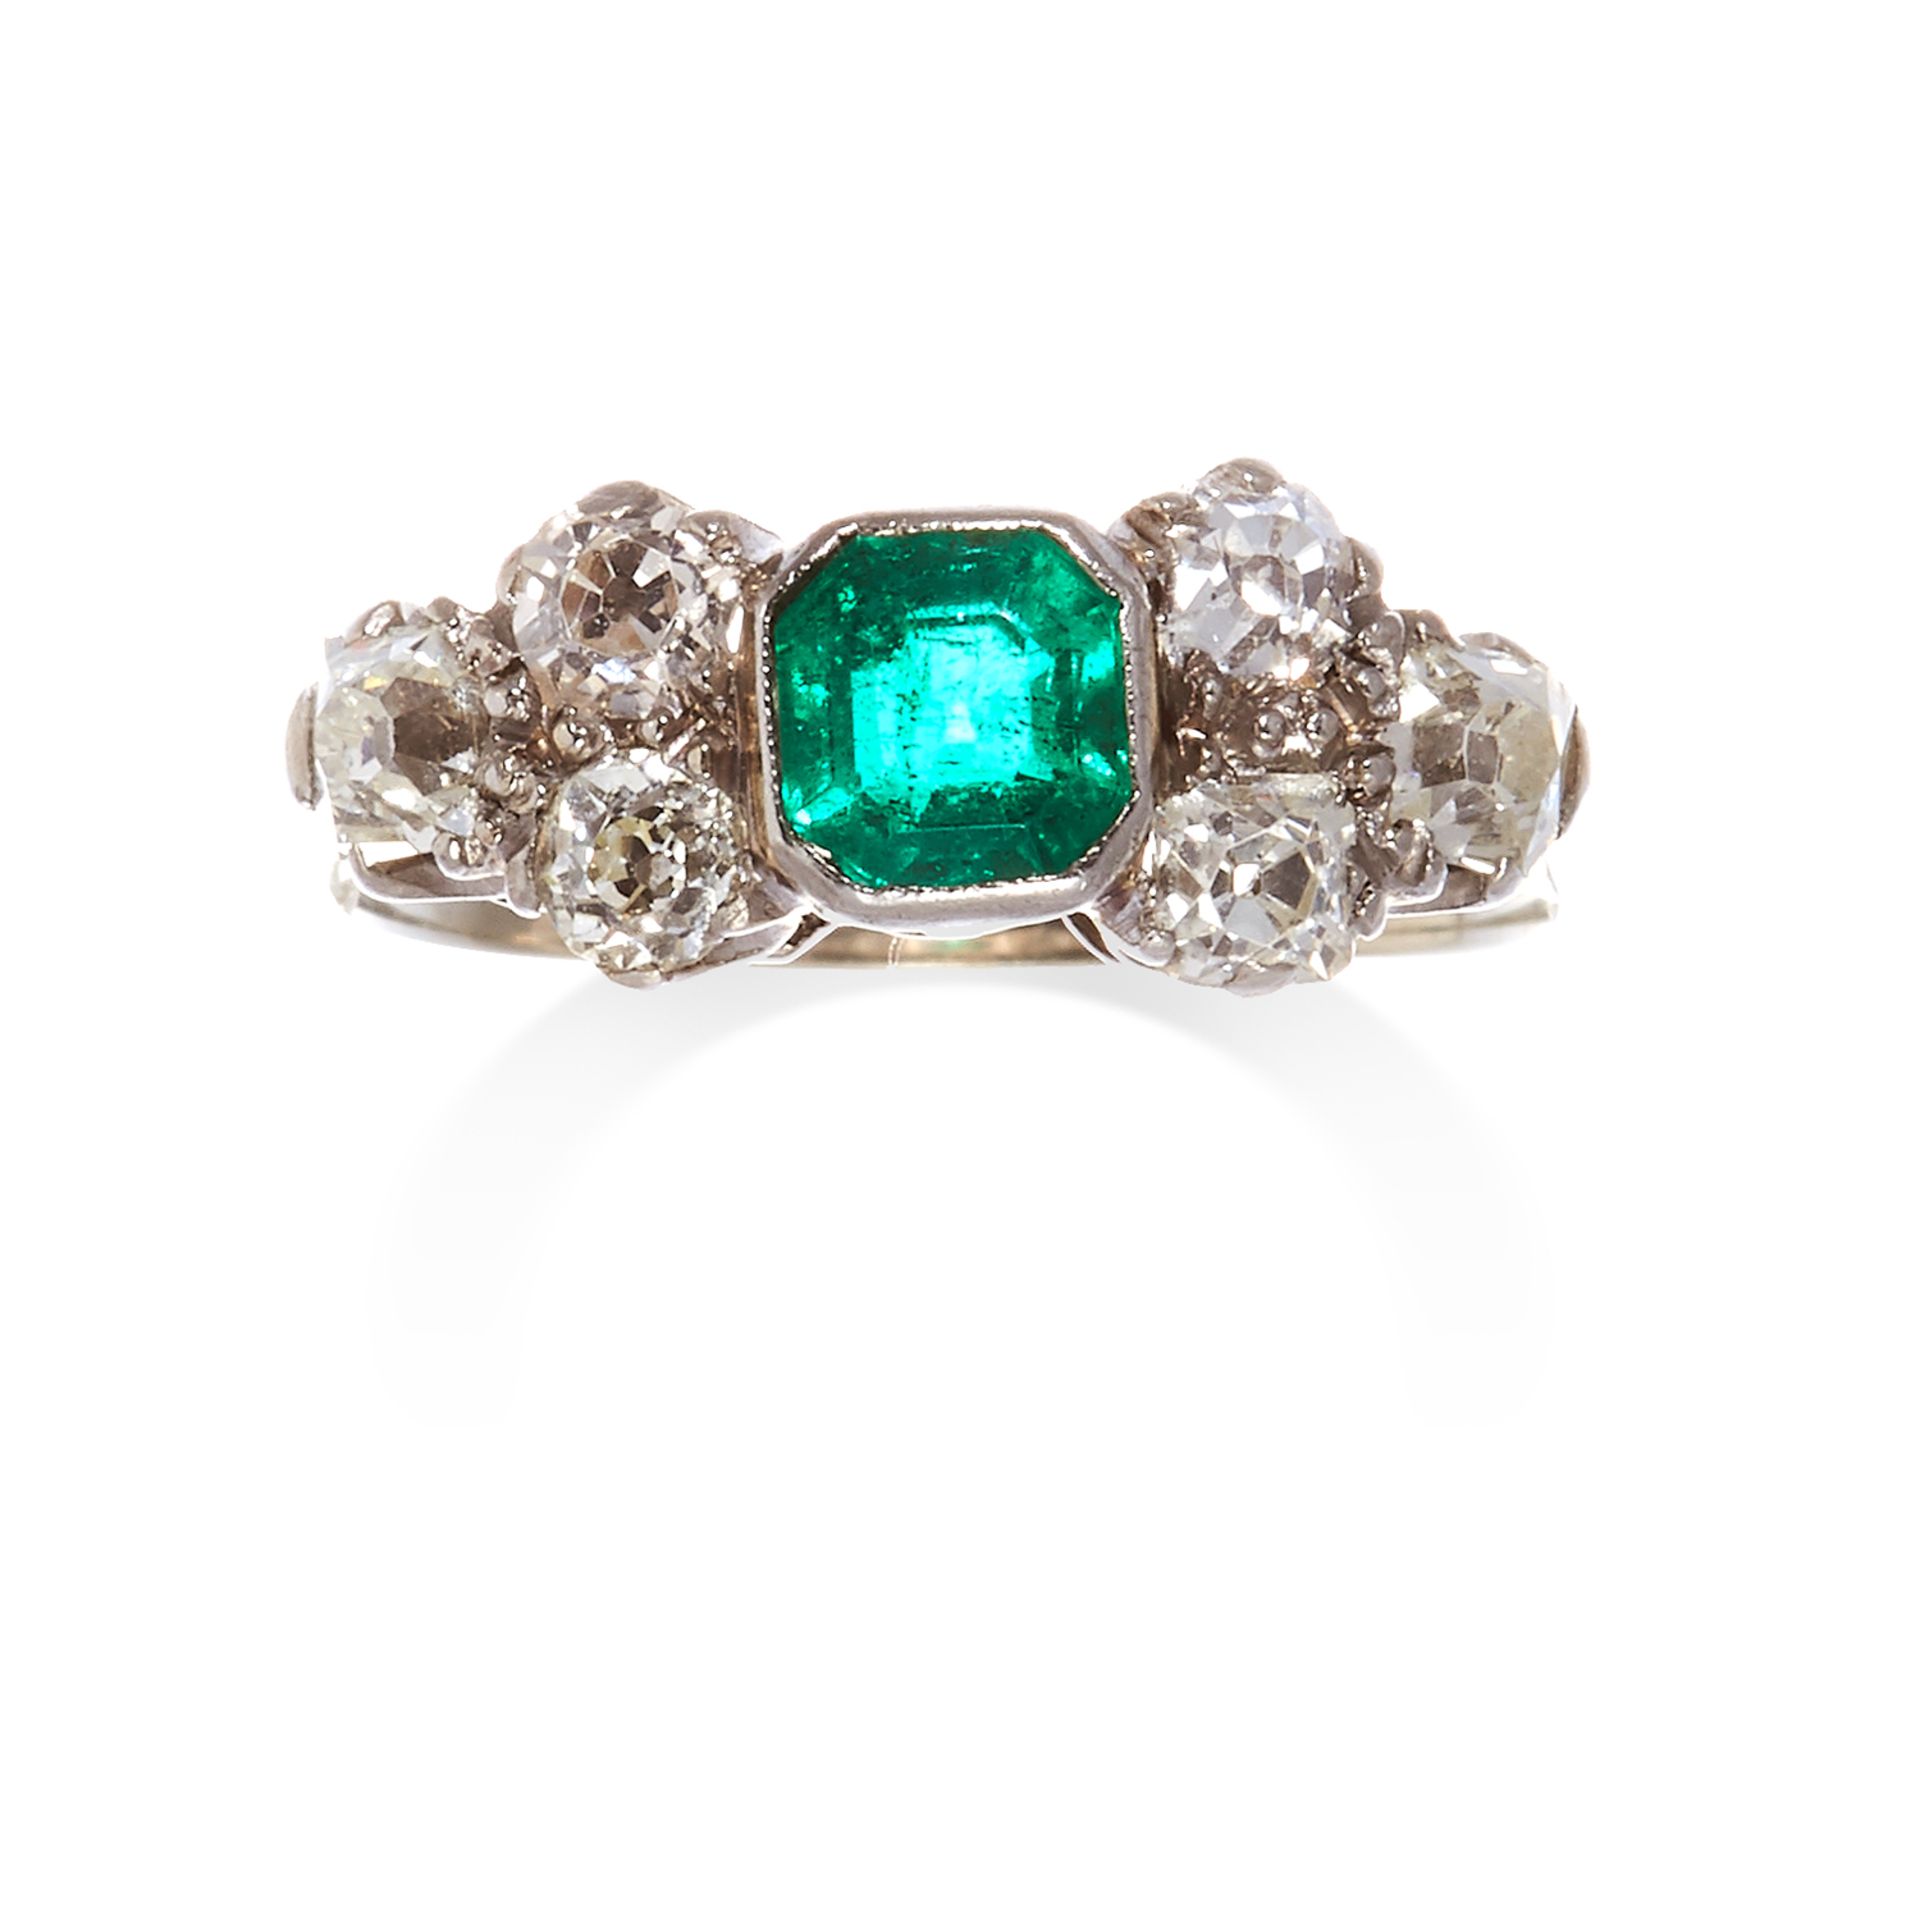 AN EMERALD AND DIAMOND RING in platinum or white gold, the central step cut emerald between old